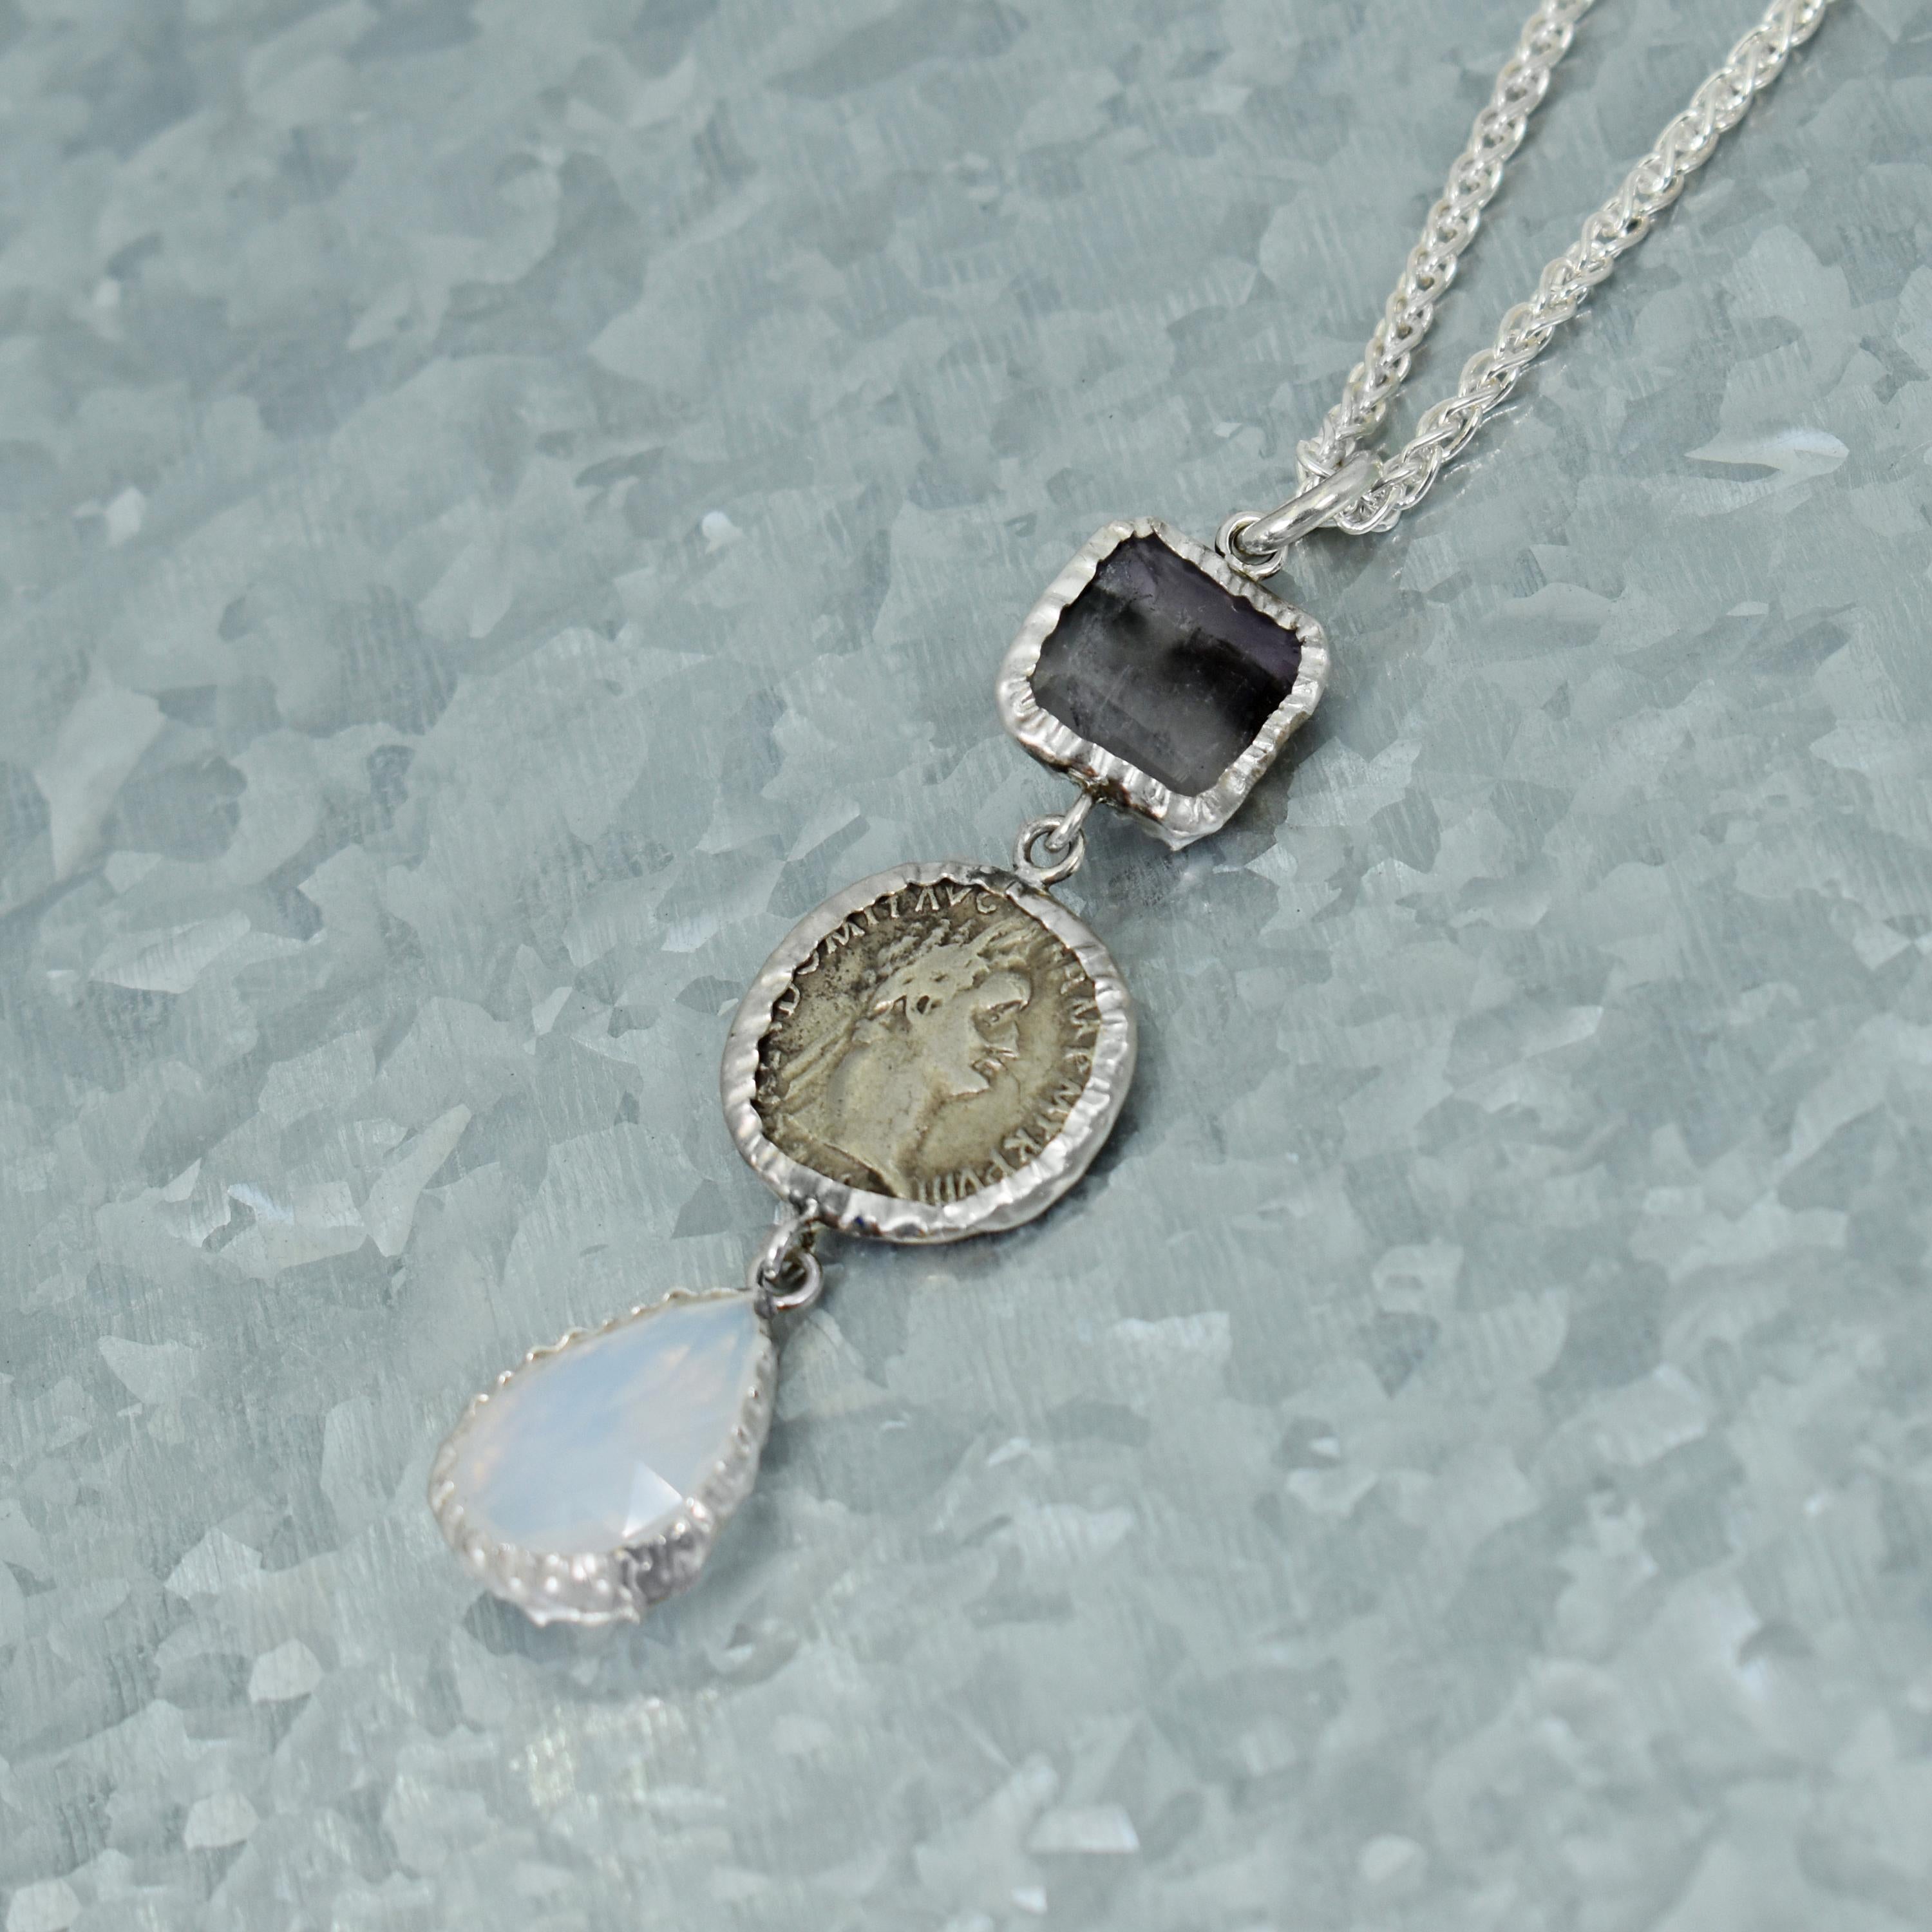 Blue John Fluorite, ancient Greek silver coin and rose cut moonstone sterling silver dangle drop pendant on a 20 inch sterling silver wheat chain necklace. Dangle pendant is 2.75 inches in length. Matching earrings are available separately on our